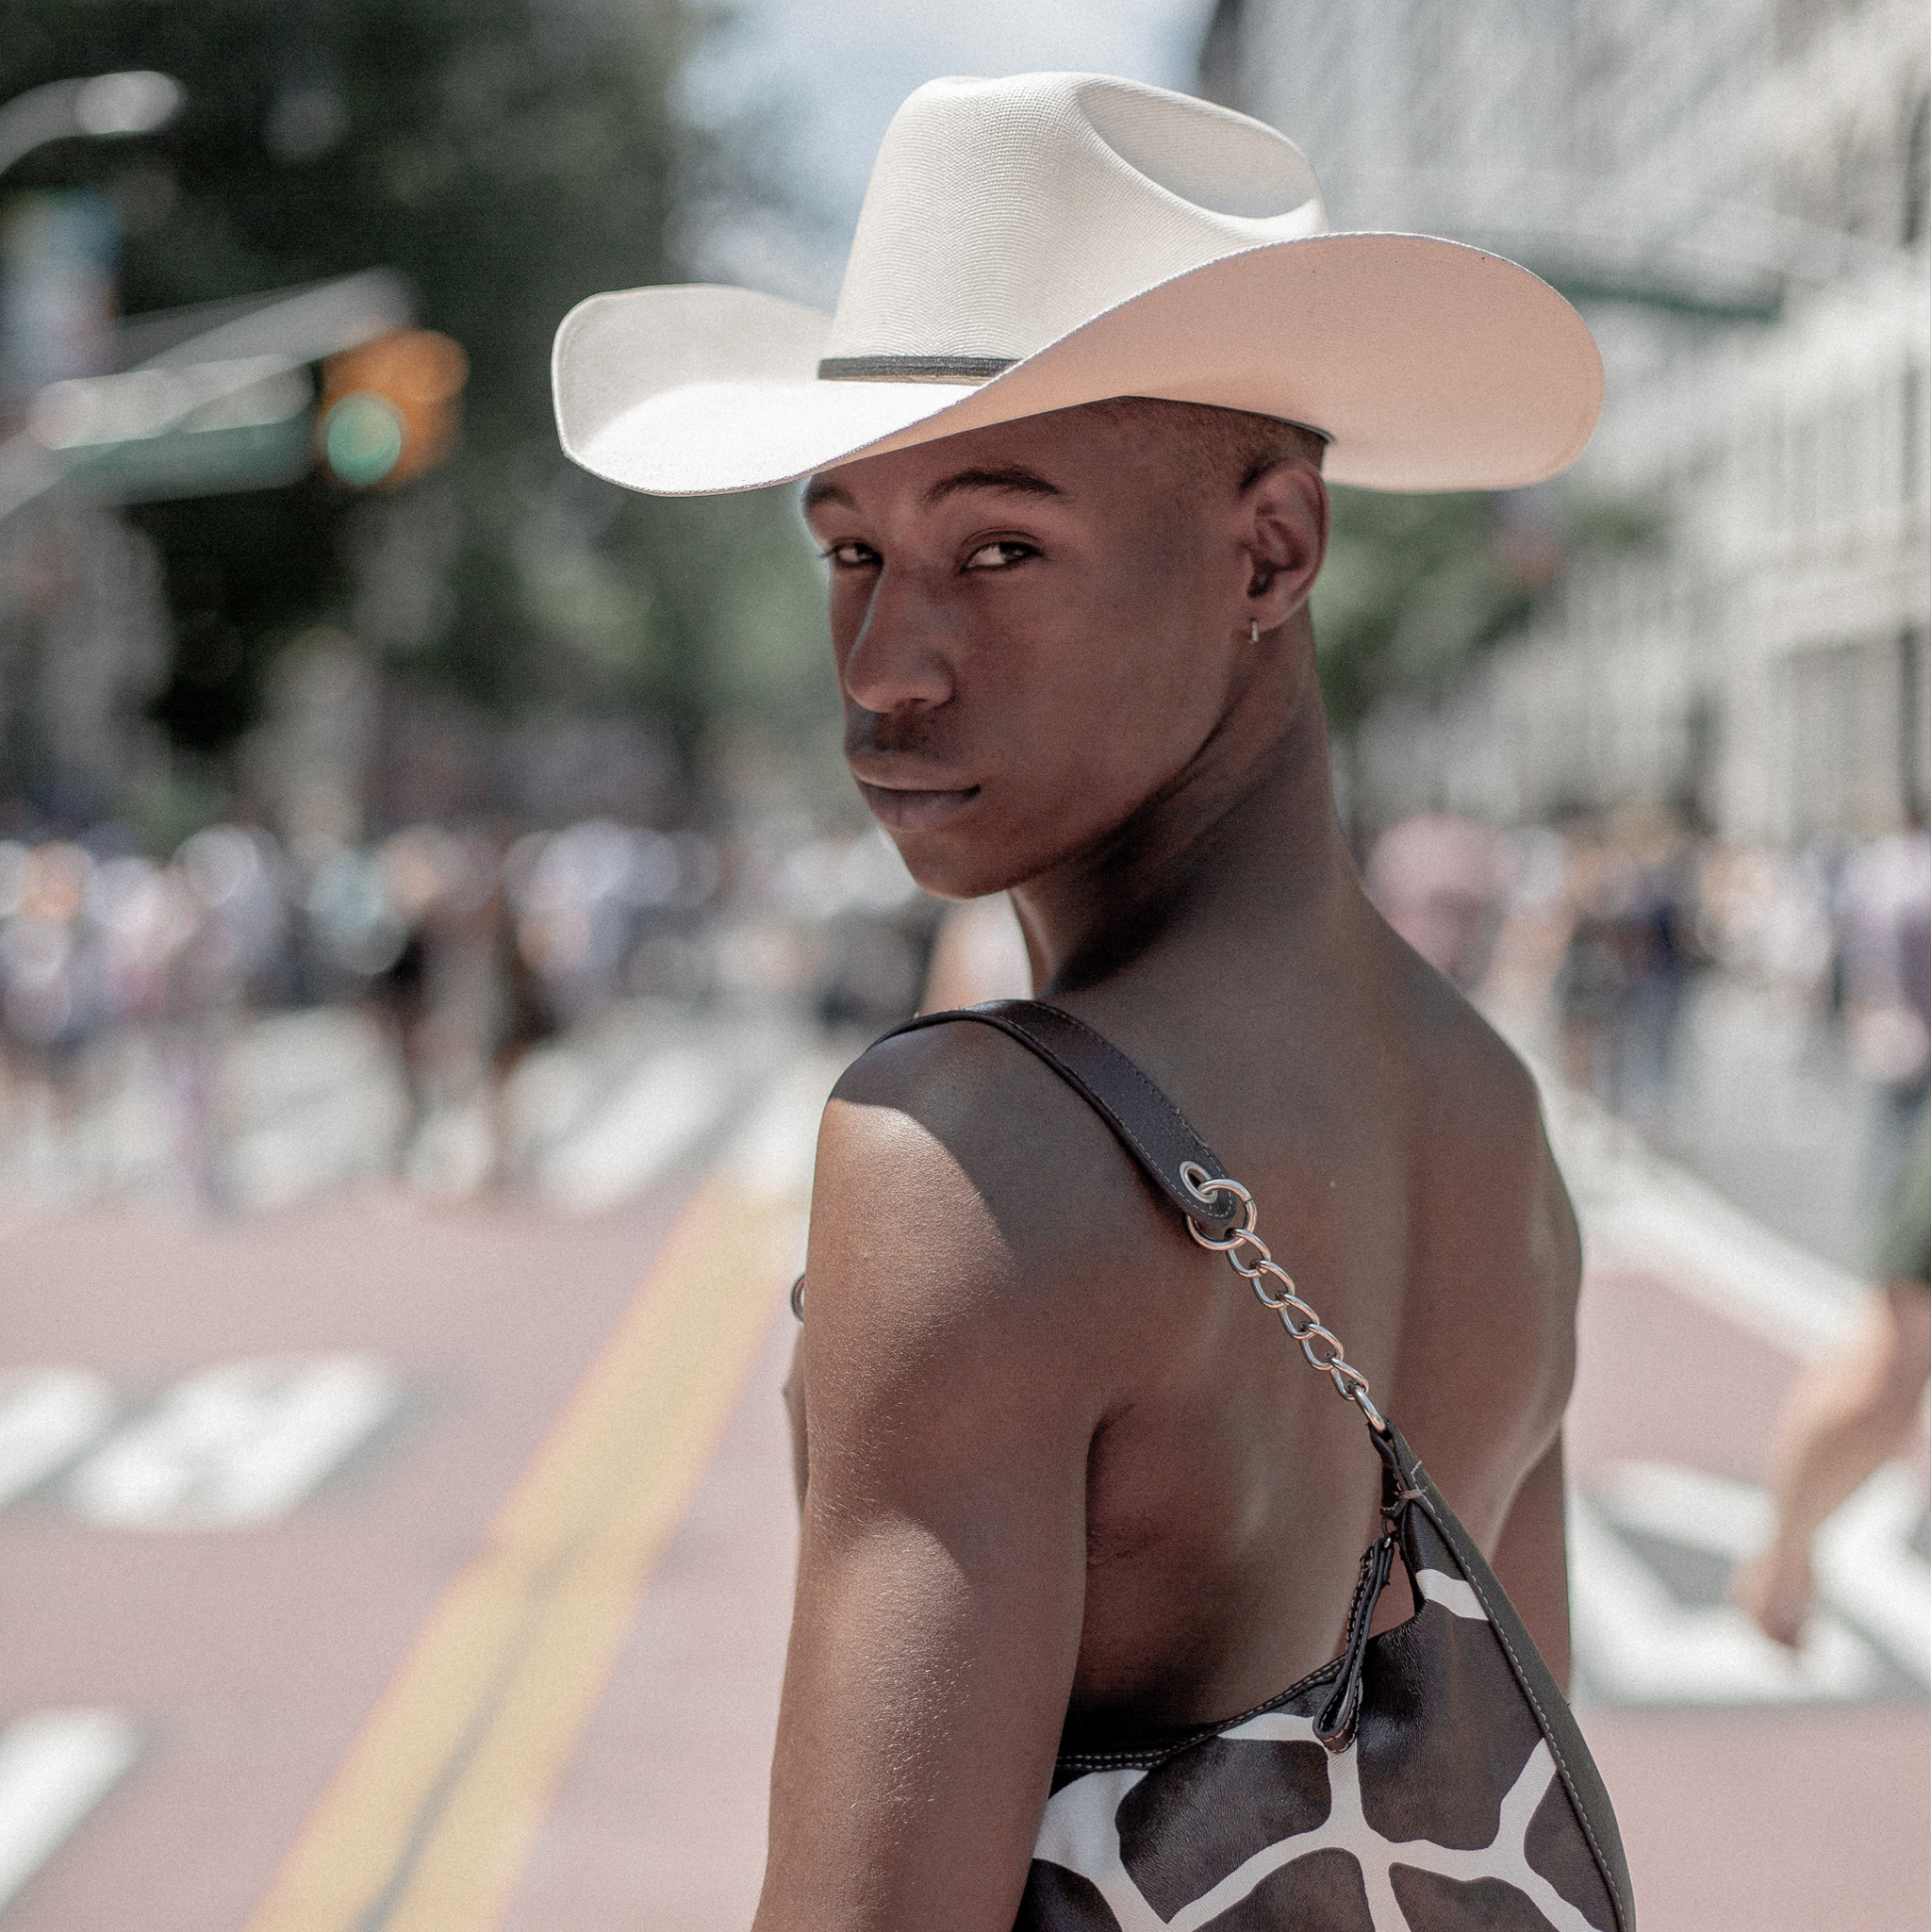 Fashionable young person of color looking over their shoulder. They are shirtless with a cowboy hat and a purse slung over their shoulder.